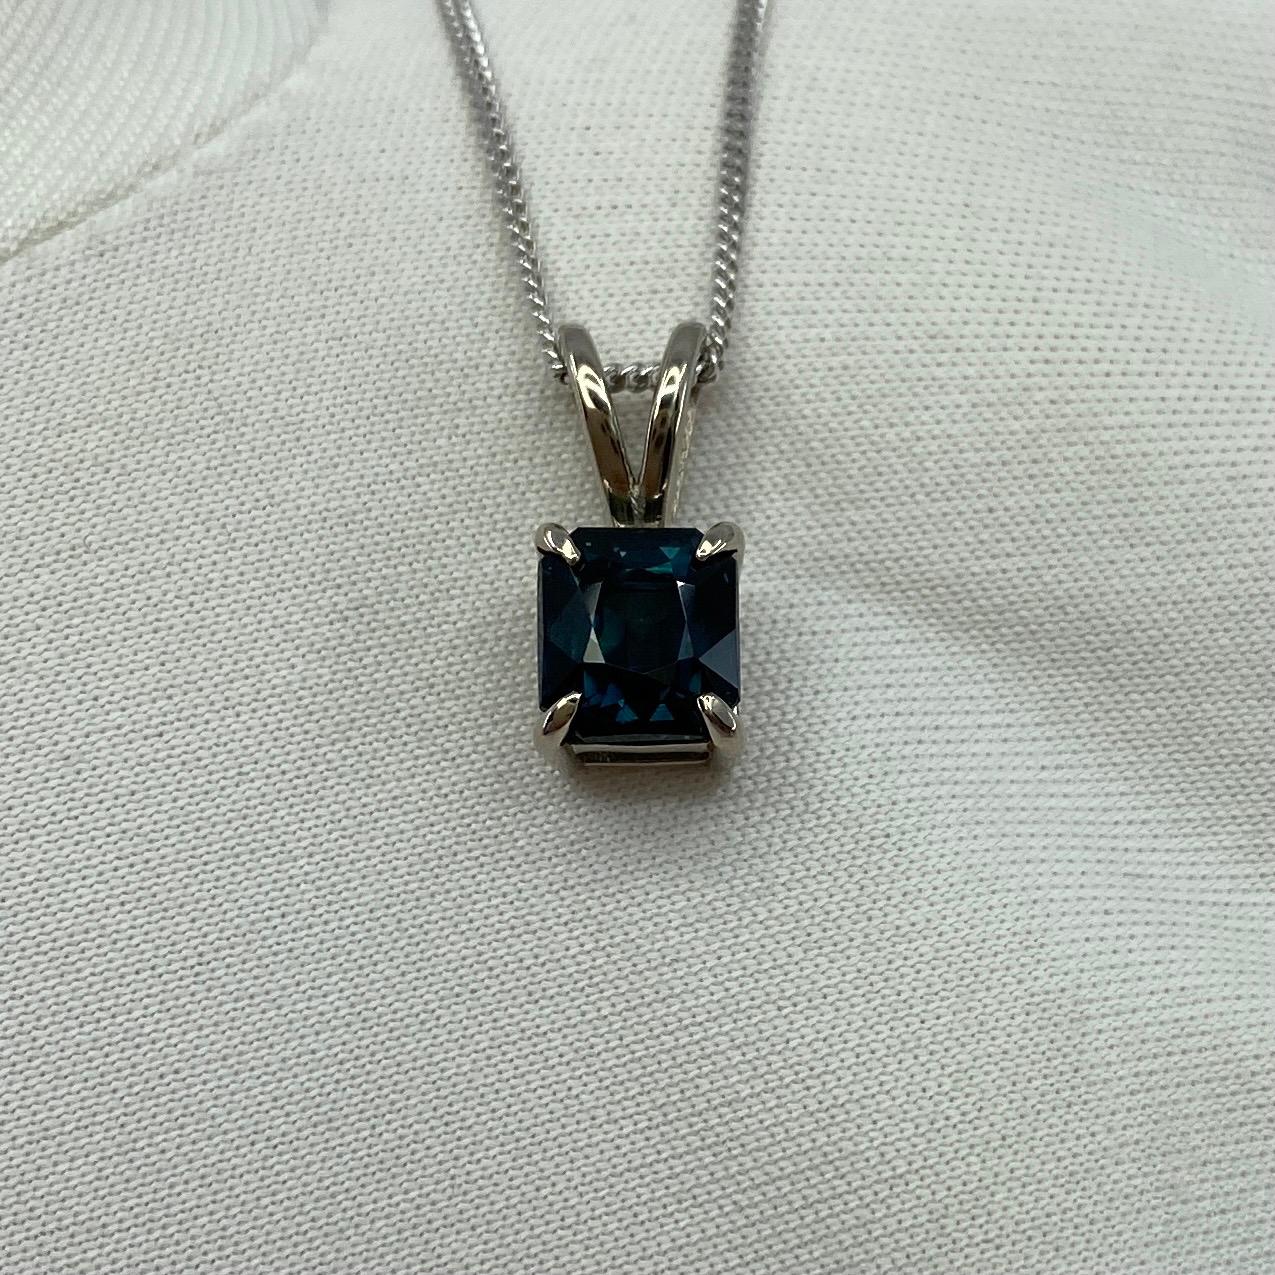 1.44ct IGI Certified Deep Teal Blue Untreated Sapphire 18k White Gold Pendant For Sale 10